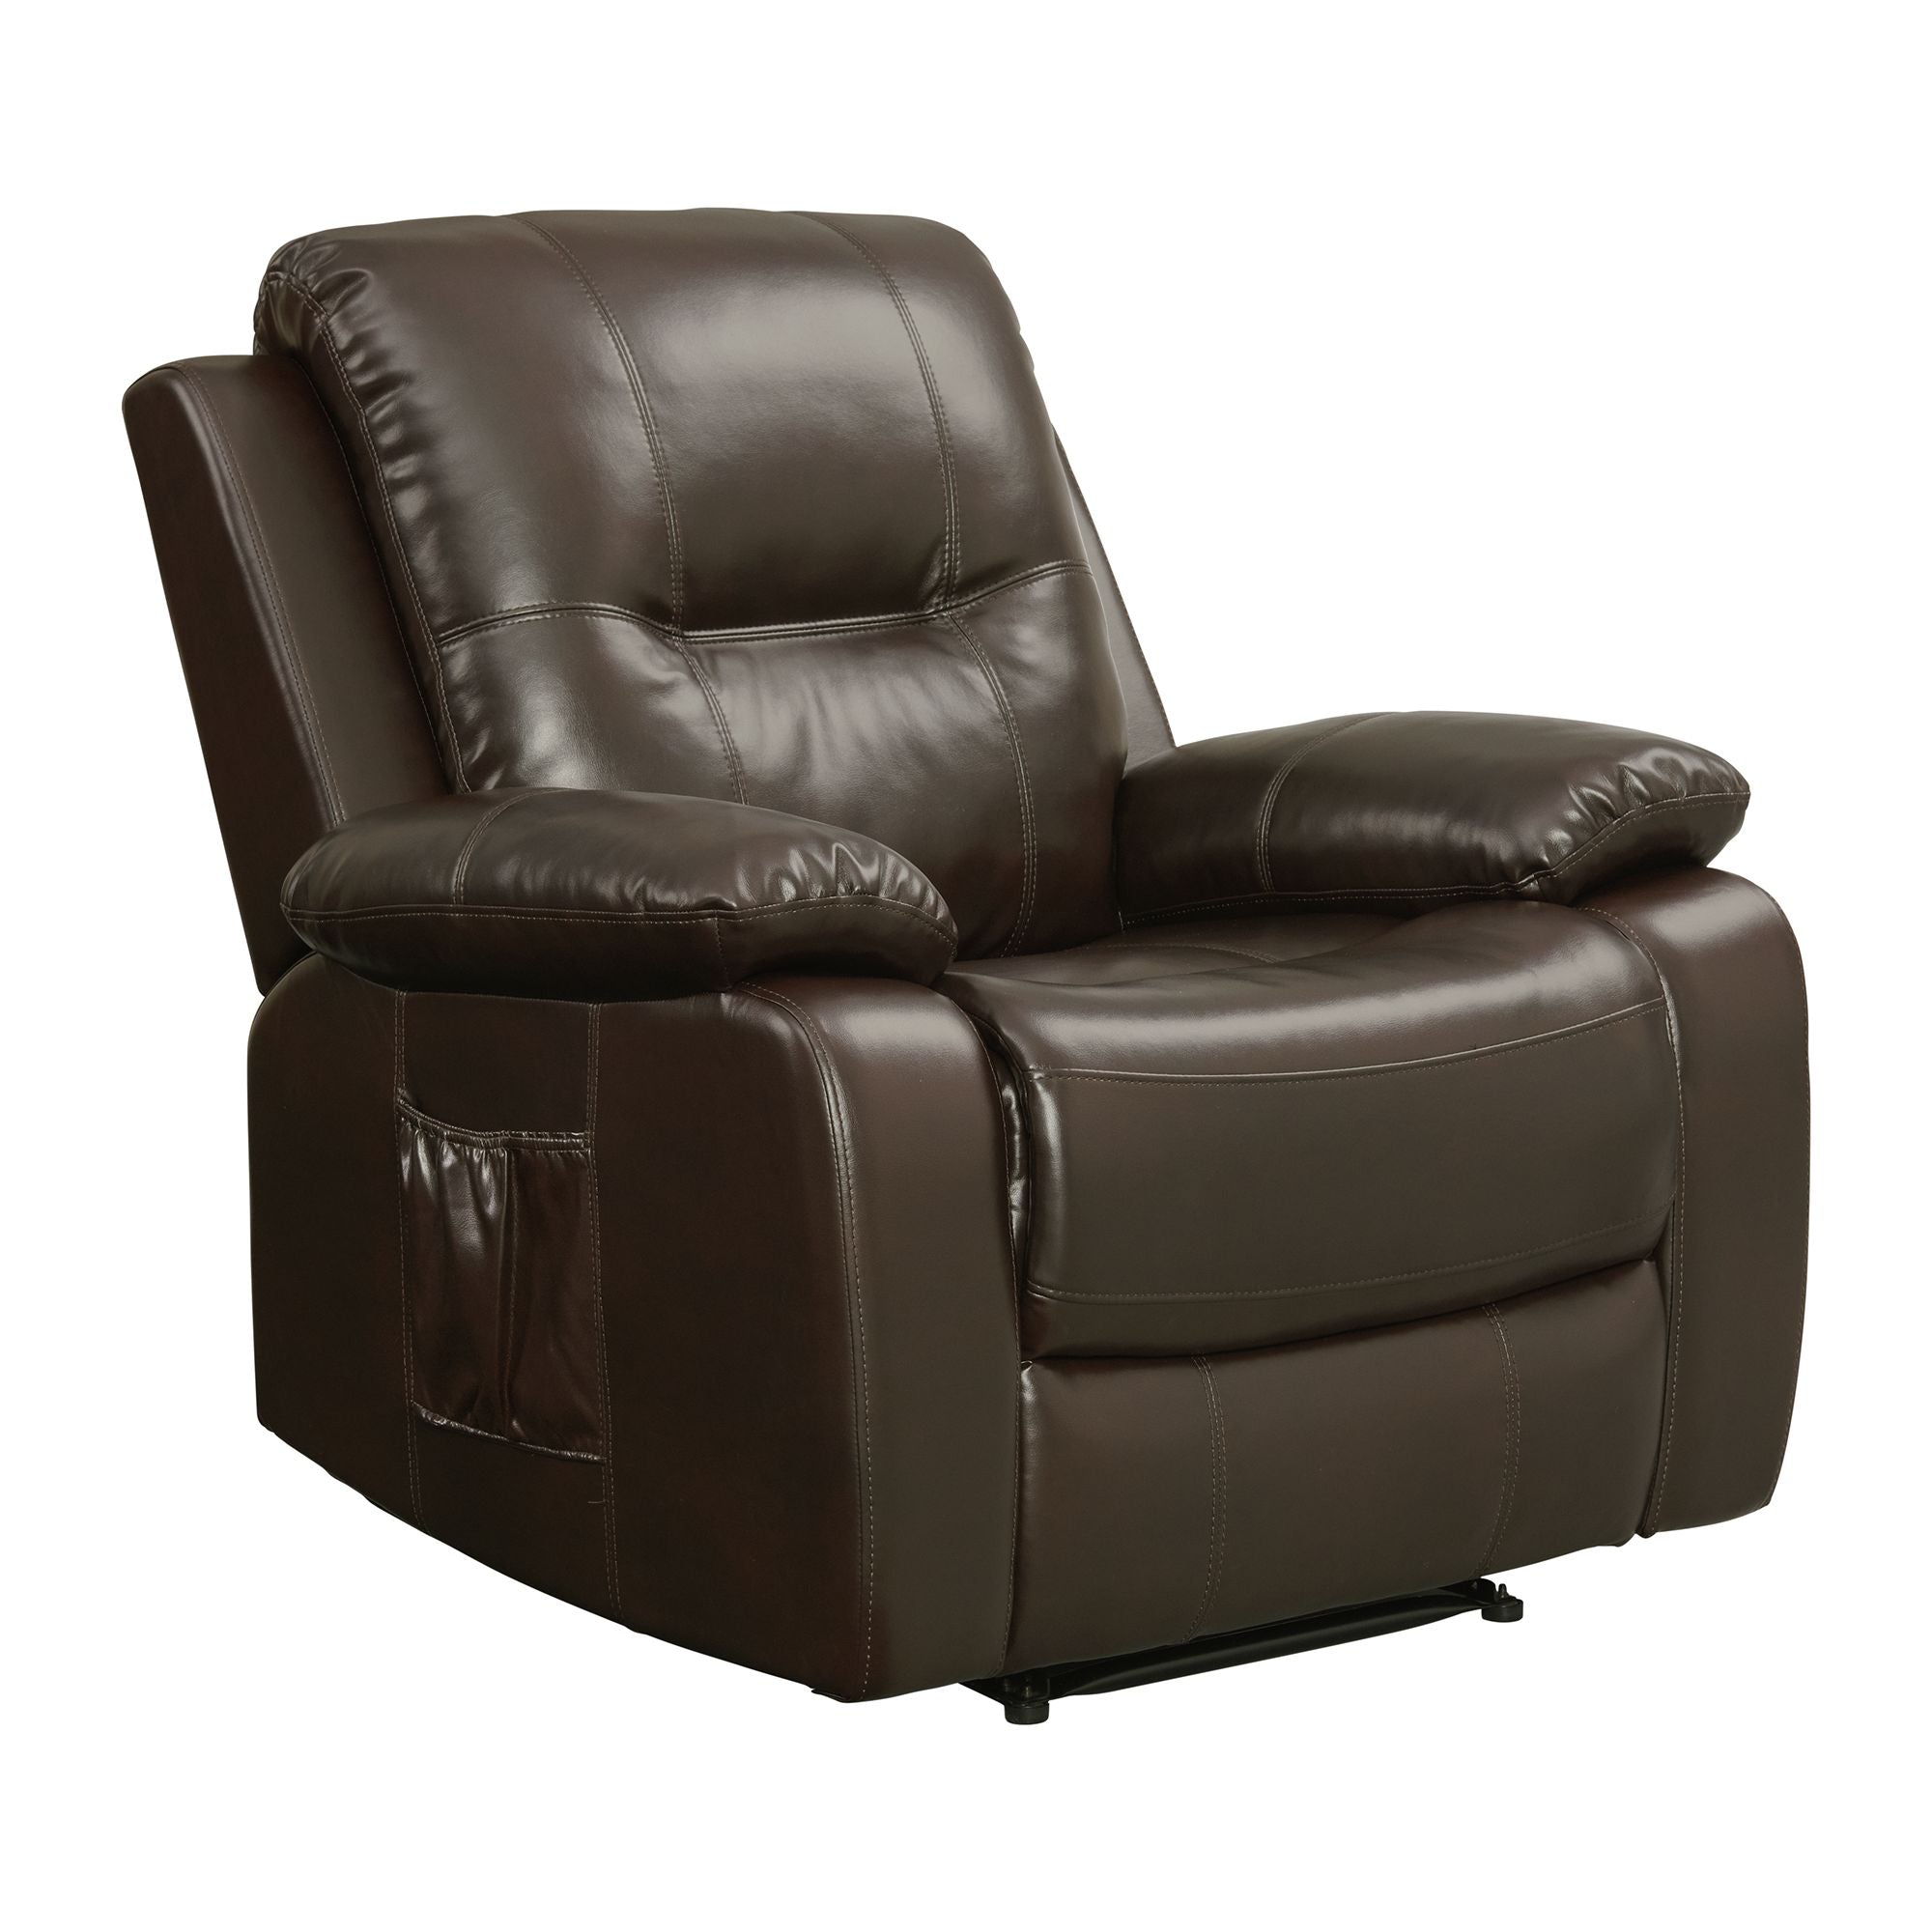 DYLAN POWER MOTION RECLINER W/LIFT IN TUCSON BROWN